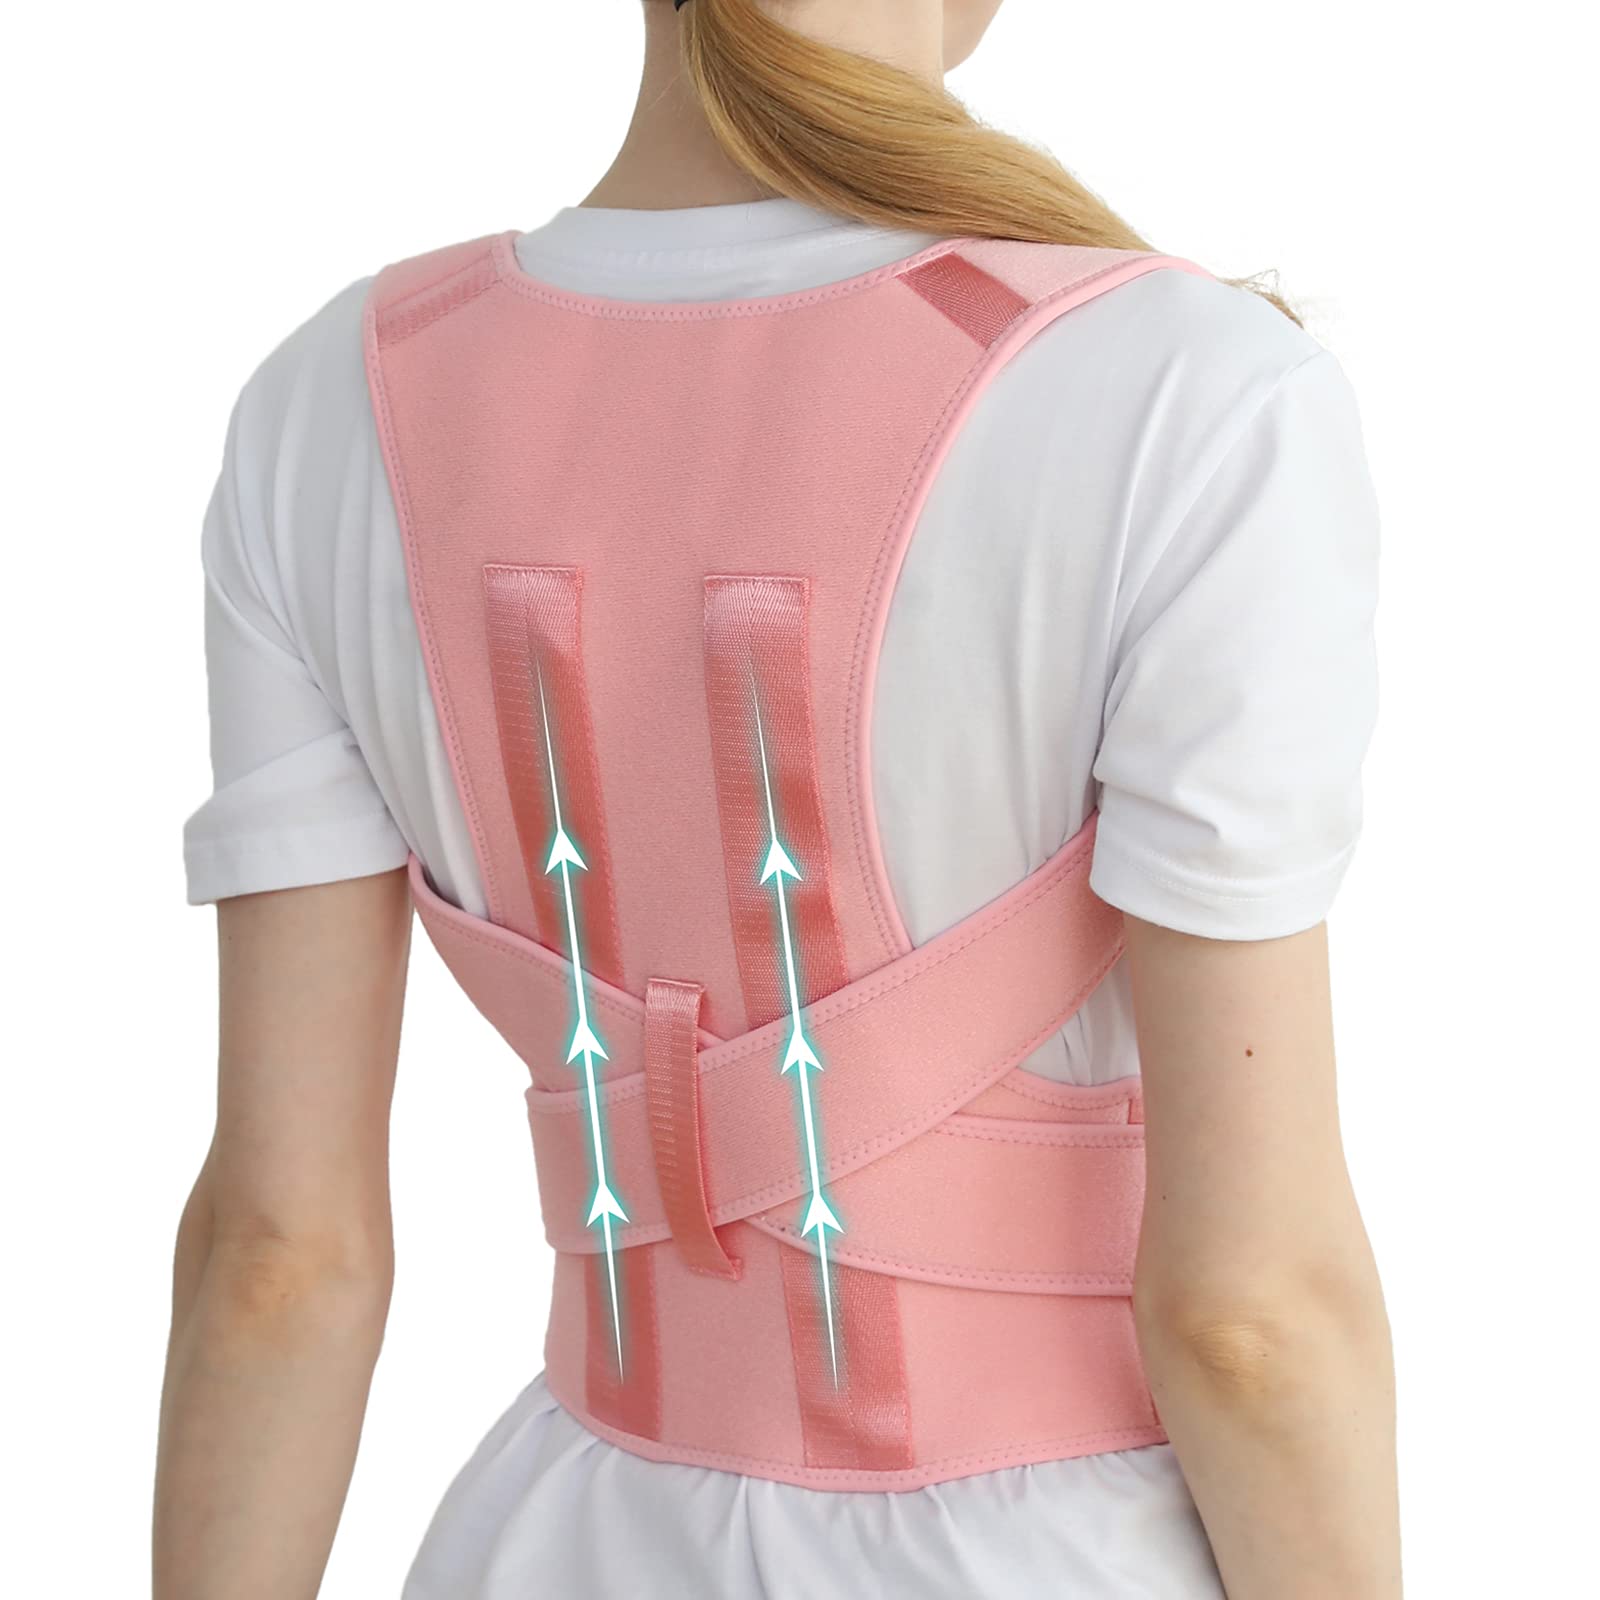 Posture Corrector for Women and Men, Adjustable Breathable Back Straightener,  Upper Back Brace for Clavicle Support and Providing Pain Relief from Neck,  Back & Shoulder Pink M Pink Medium